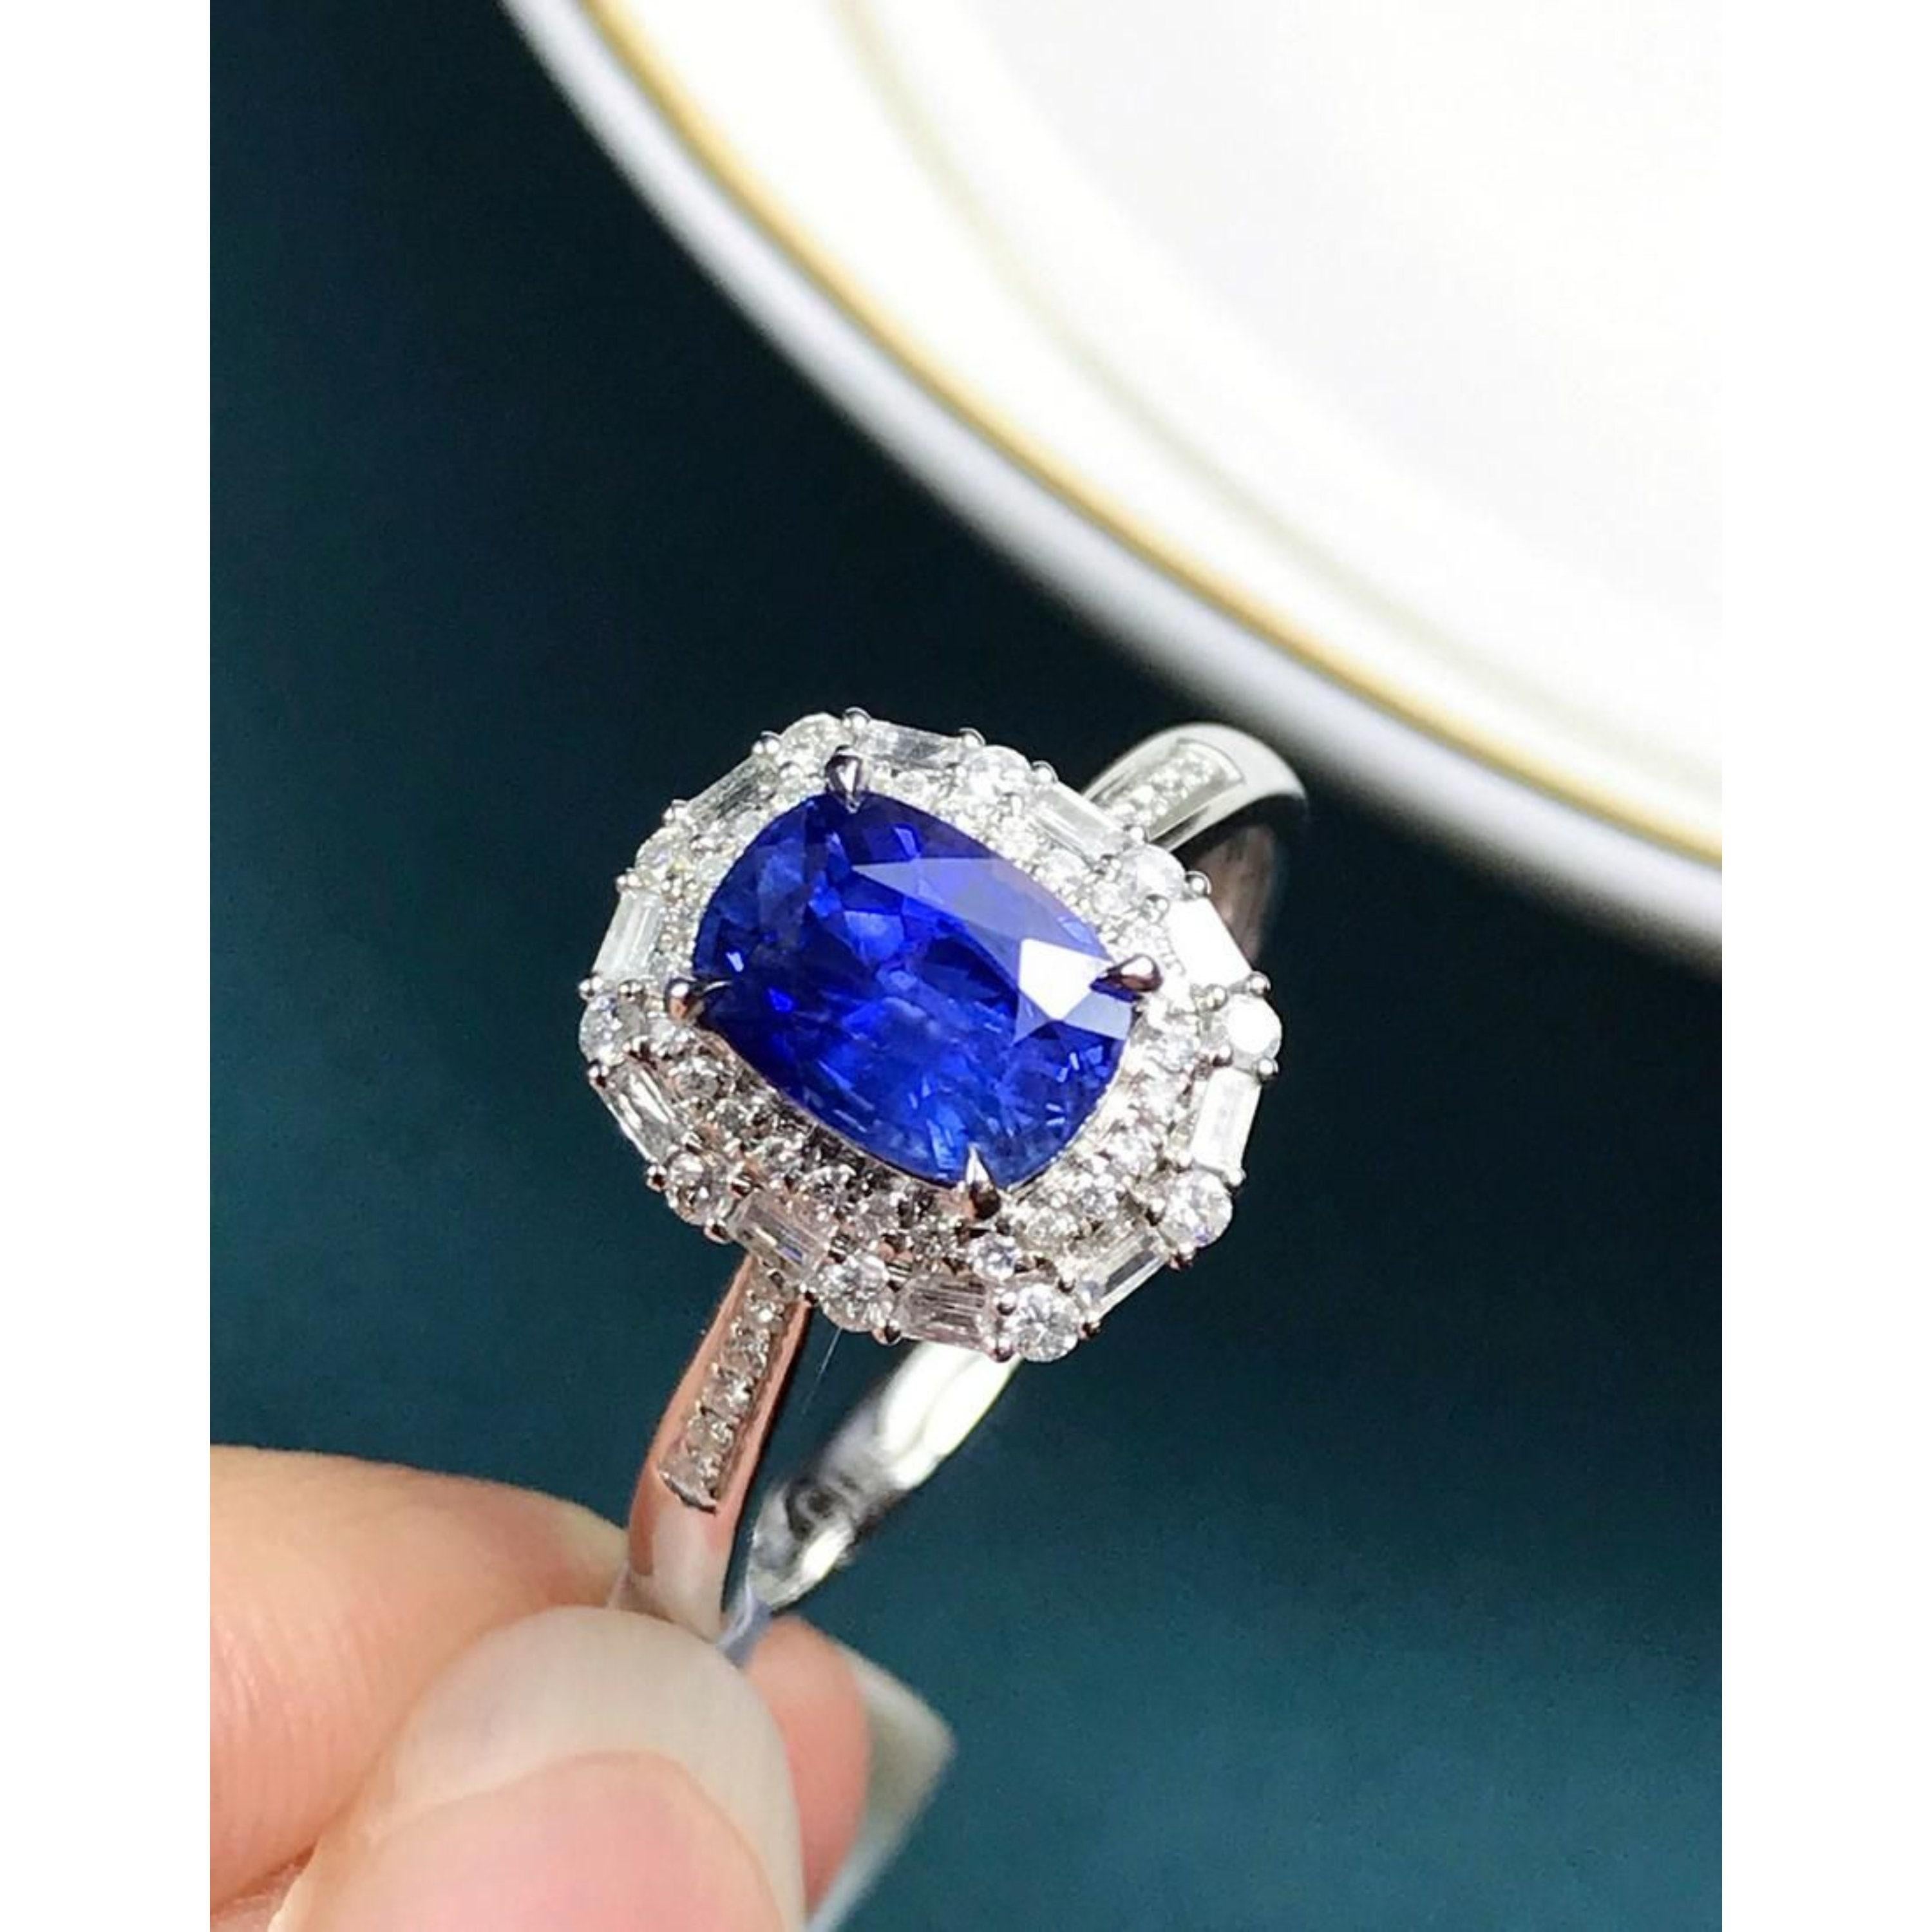 For Sale:  Natural Cushion Cut Sapphire Engagement Ring, Diamond Wedding Ring 5